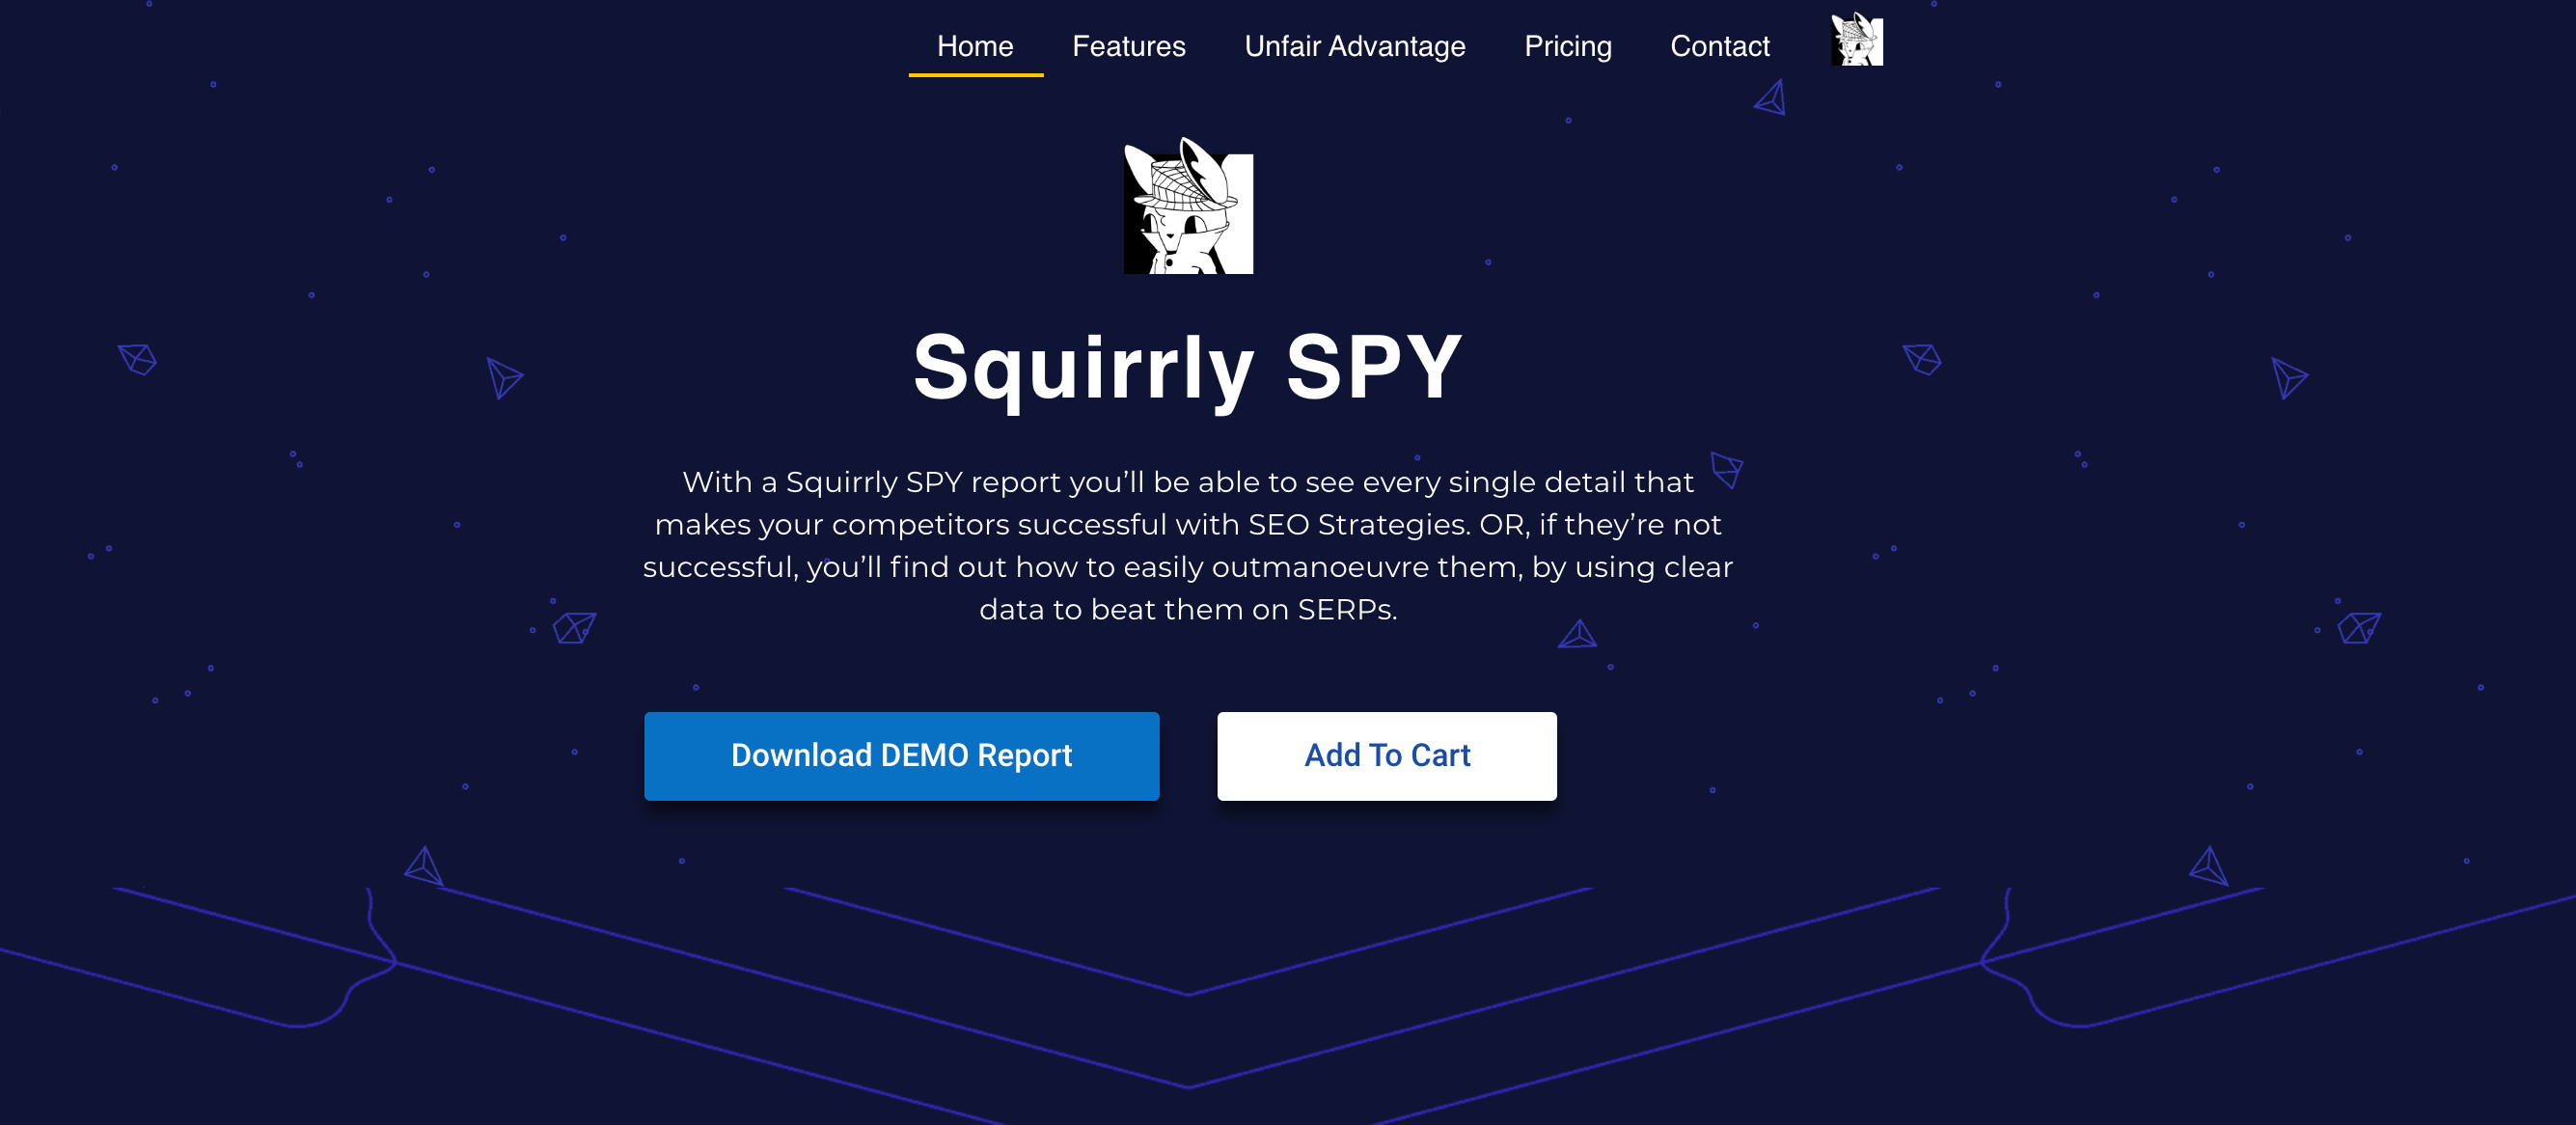 Squirrly Review- Squirrly SPY